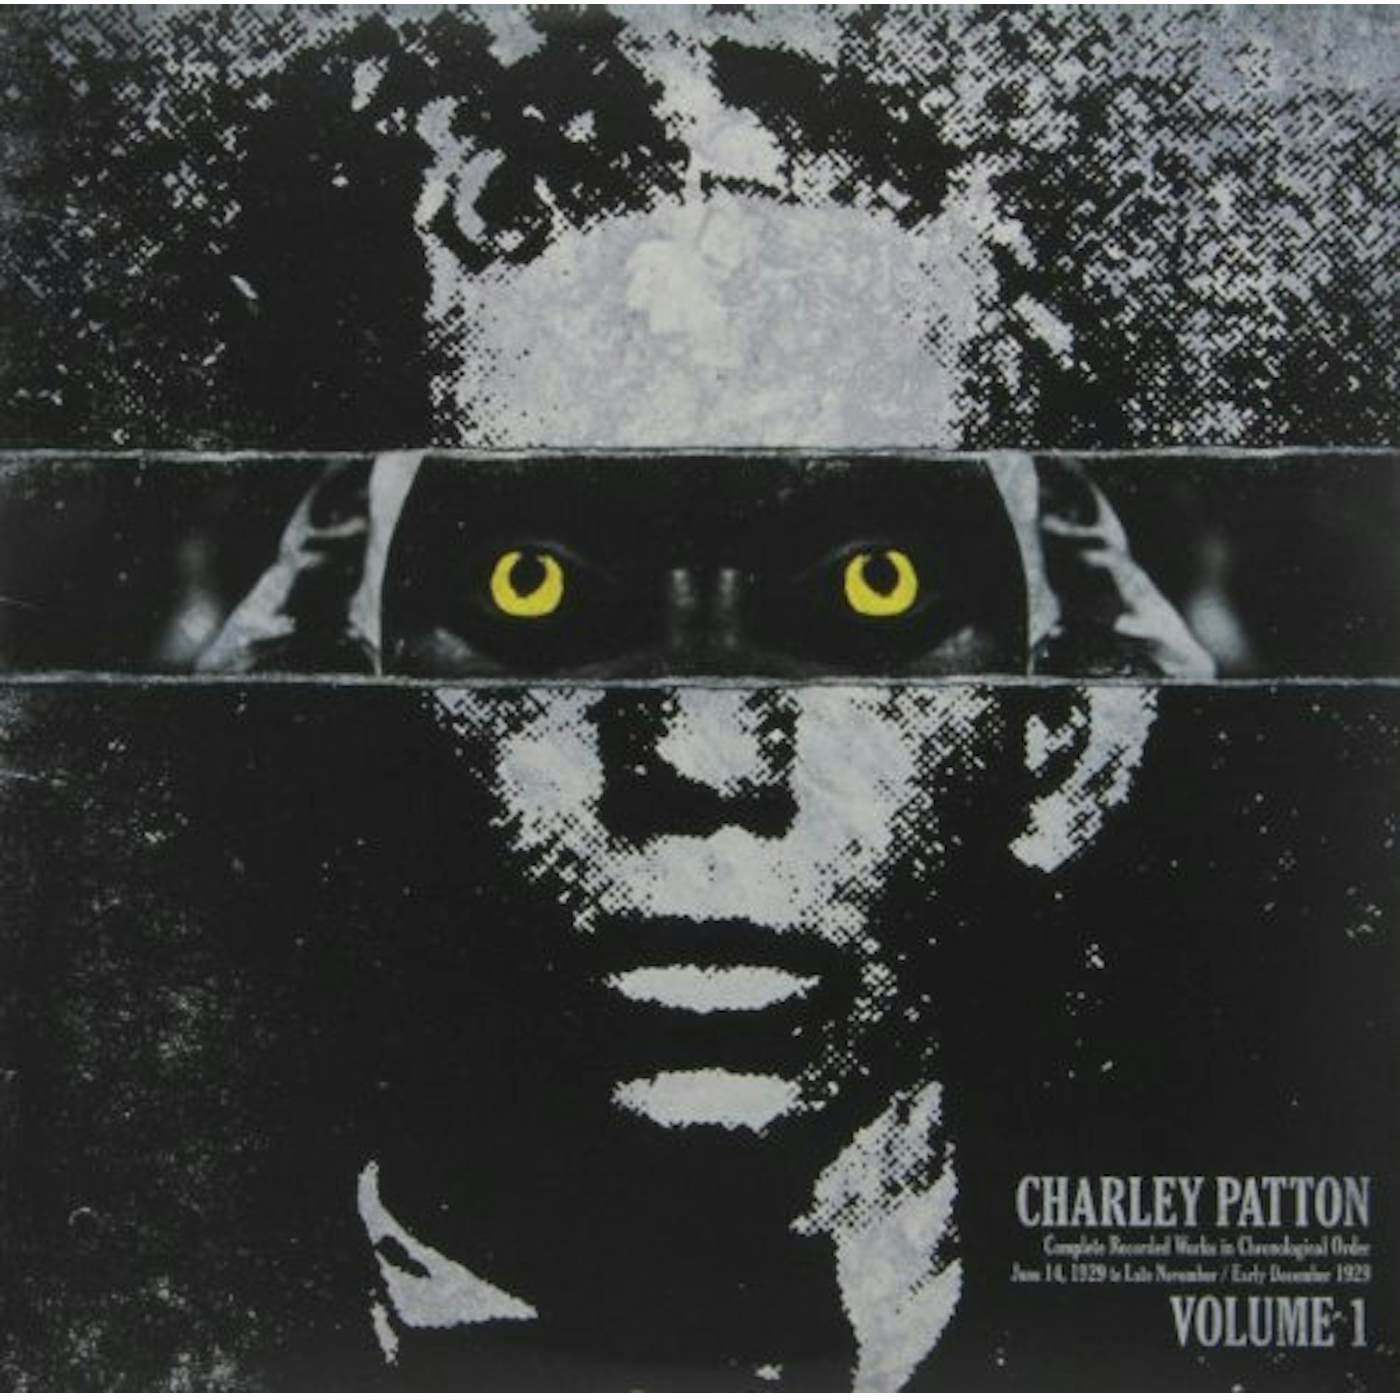 Charley Patton COMPLETE RECORDED WORKS IN CHRONOLOGICAL ORDER 1 Vinyl Record